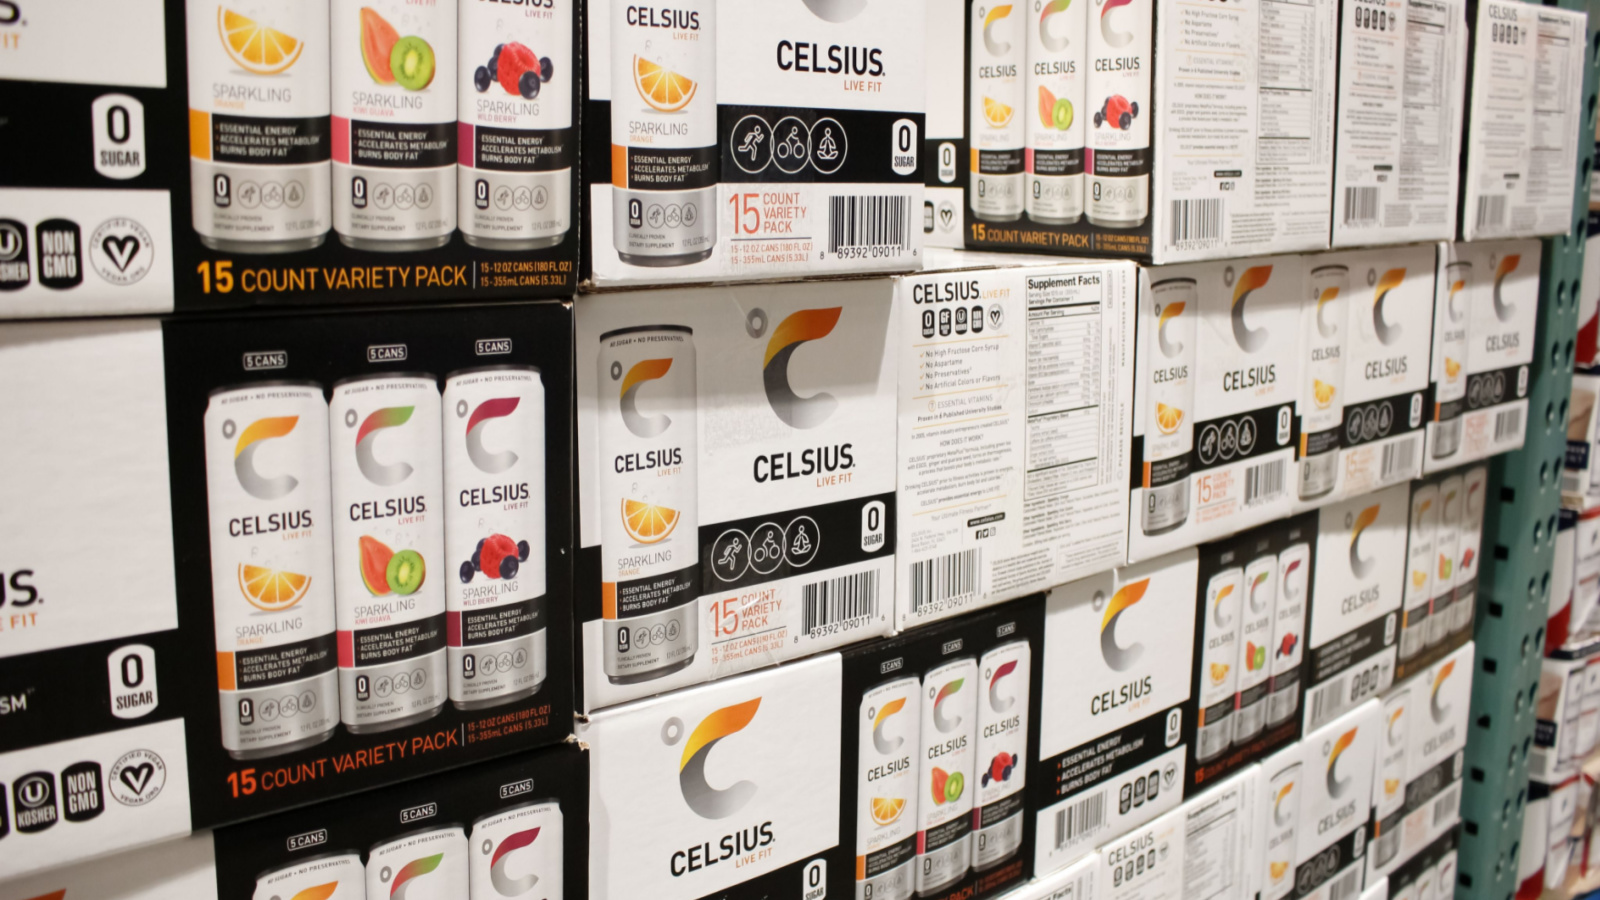 CELH stock: A view of several cases of Celsius energy drinks, on display at a local big box grocery store.